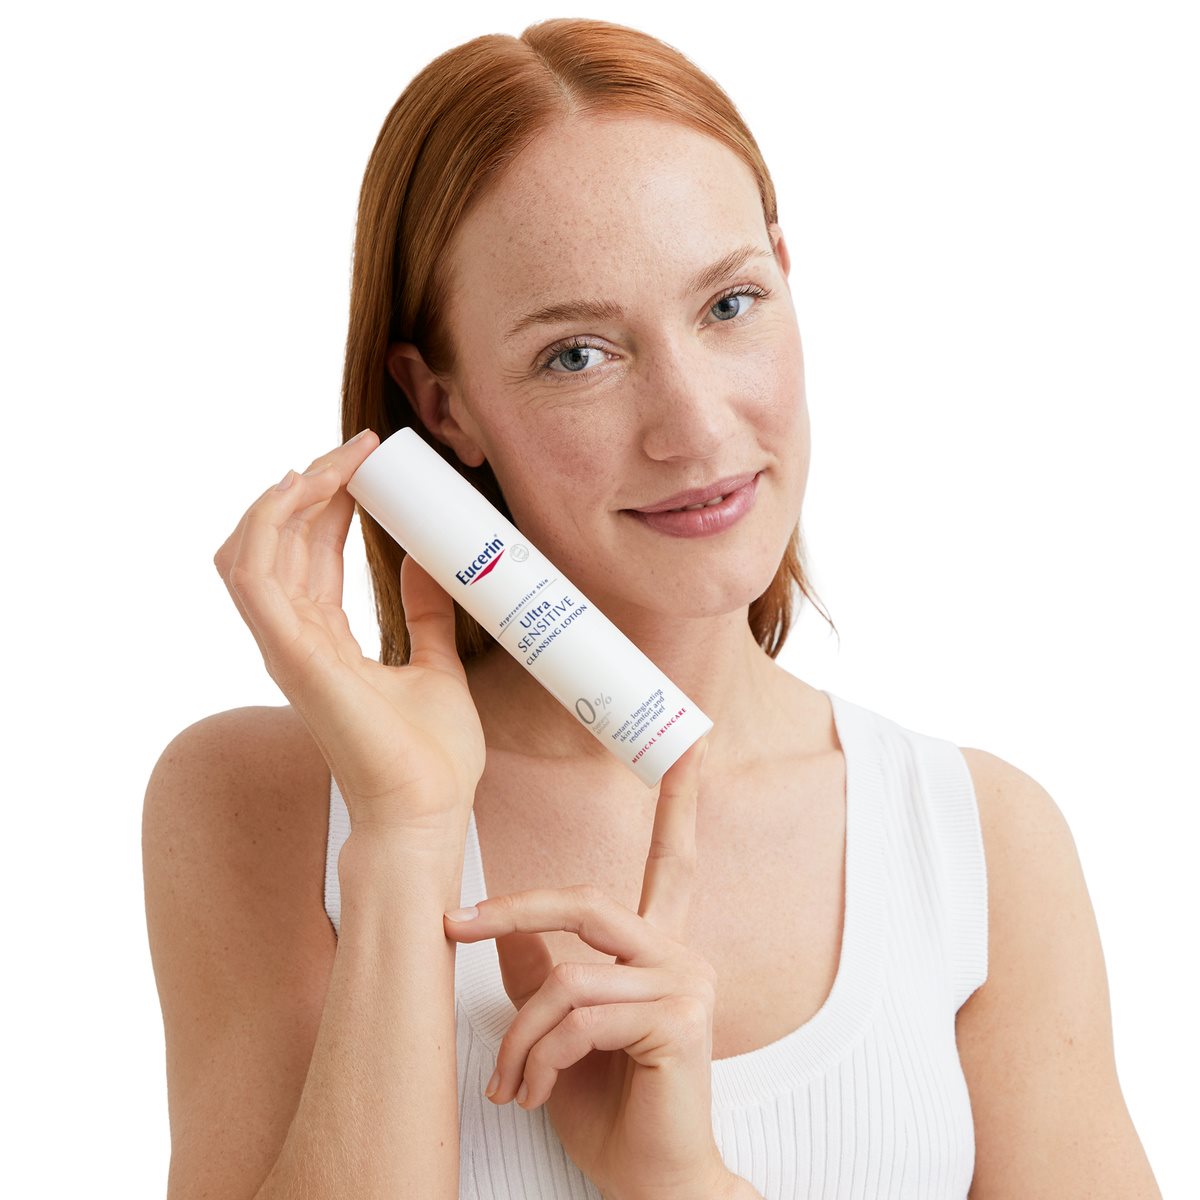 Eucerin UltraSENSITIVE Lotion thoroughly and gently hypersensitive and effectively make-up.